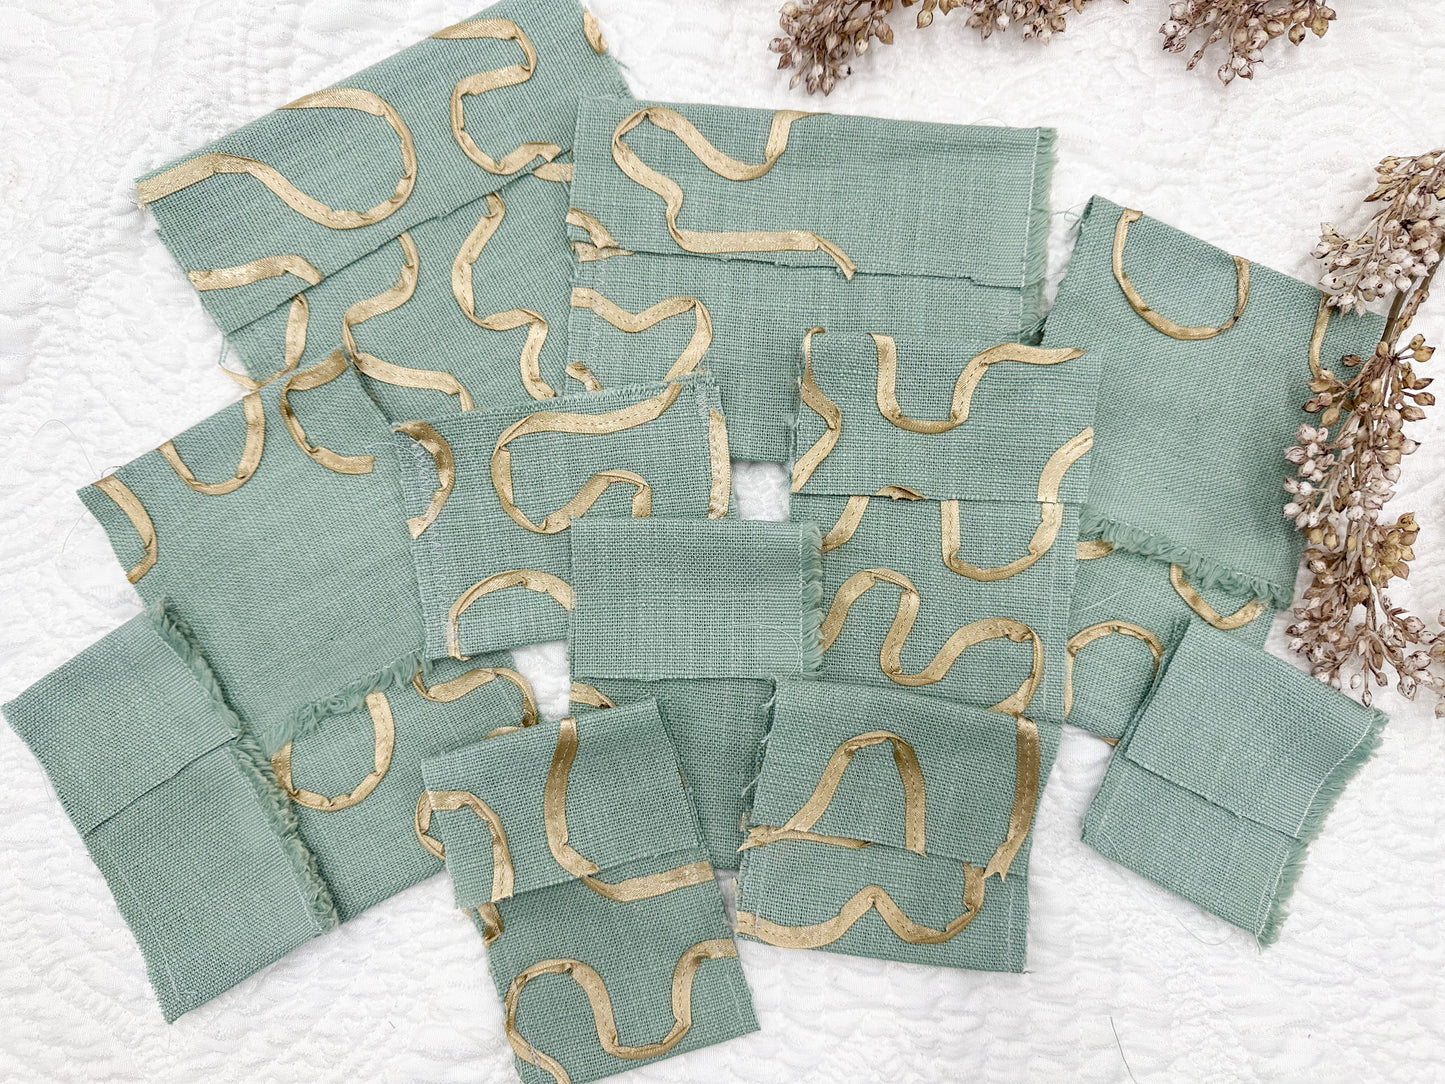 Rough Sewn Teal Fabric Pockets (Set of 11)